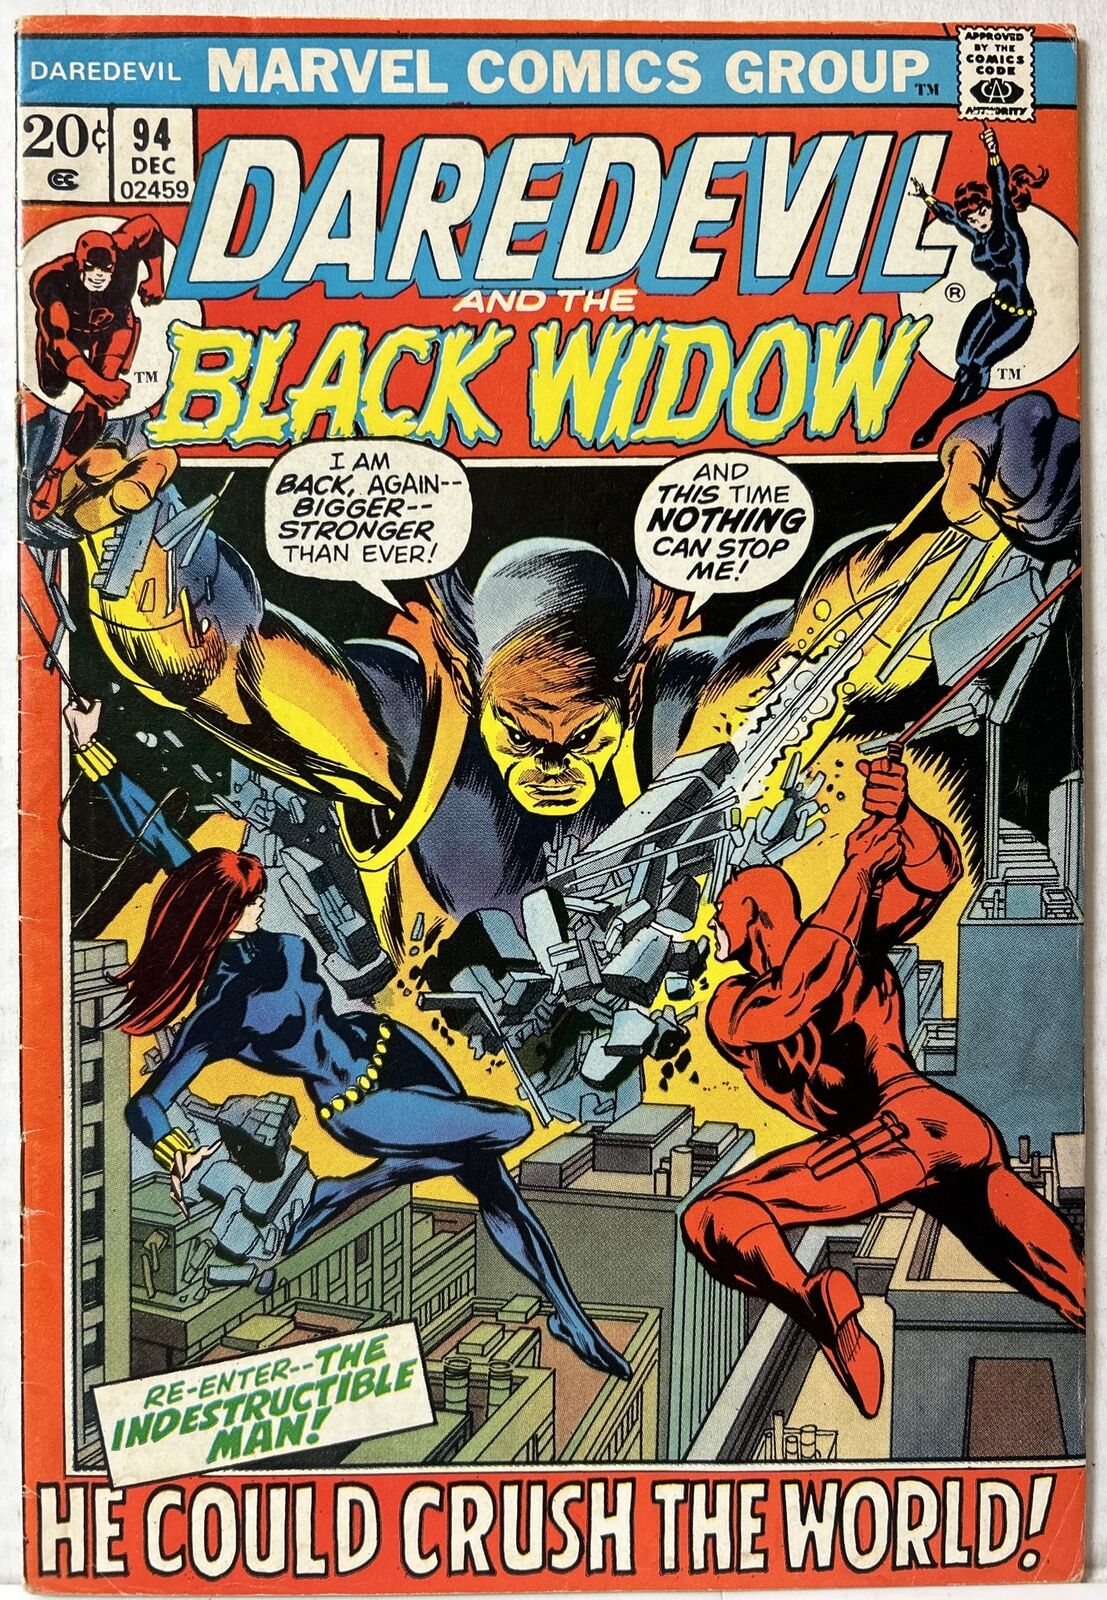 Daredevil #94 He Can Crush the World Black Widow Marvel 1972 VG-FN